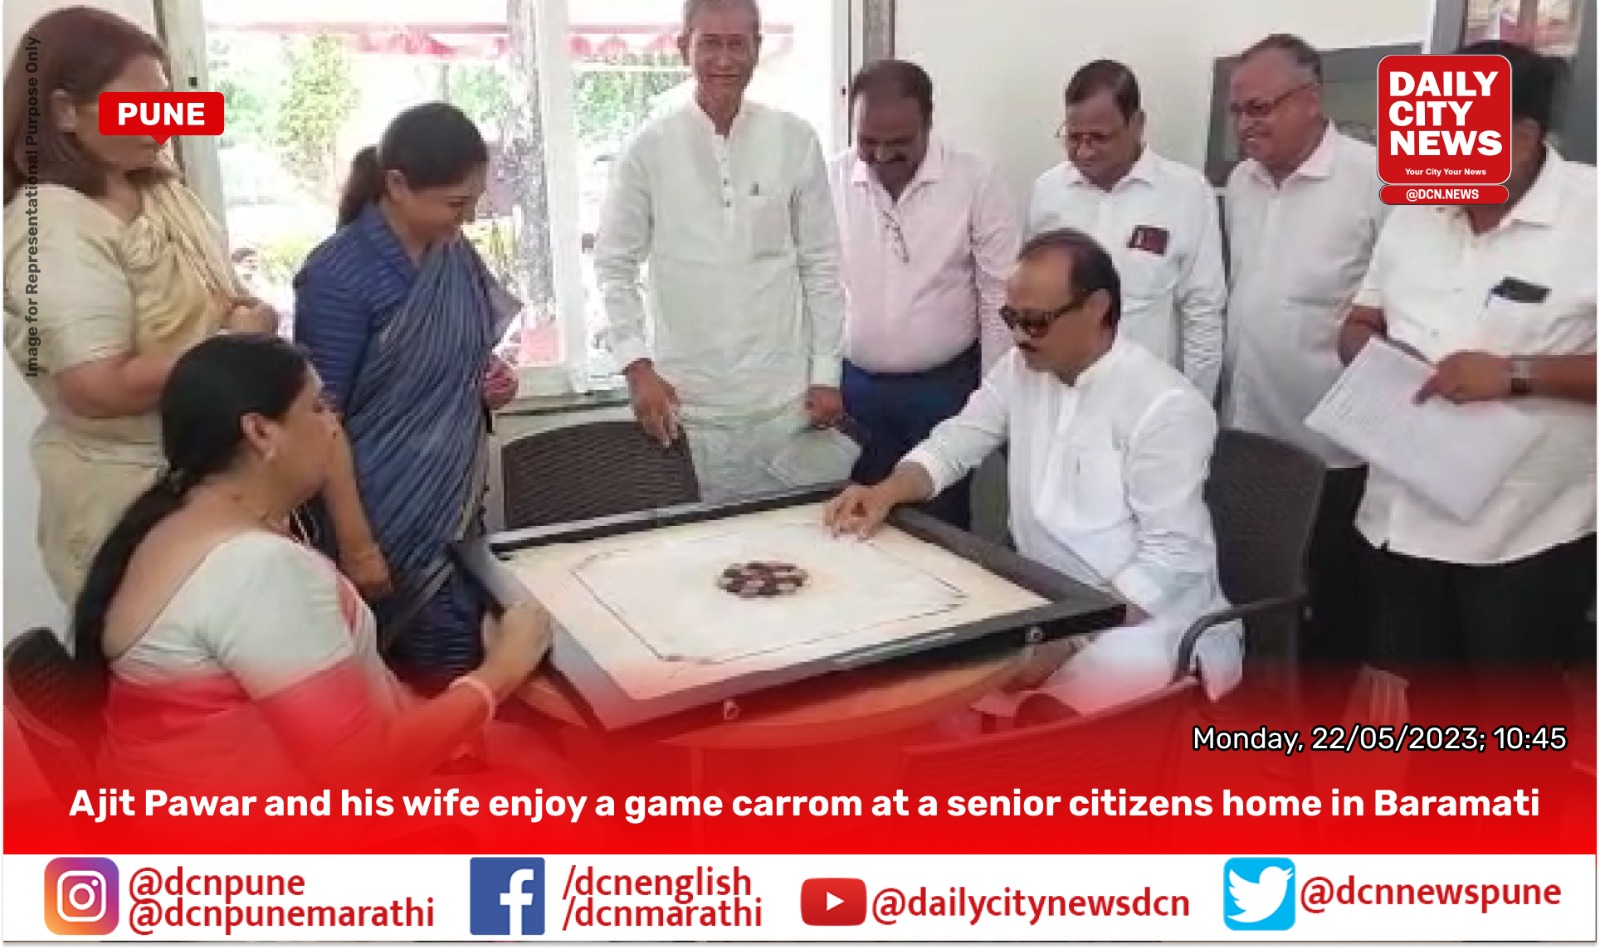 Ajit Pawar and his wife enjoy a game carrom at a senior citizens home in Baramati